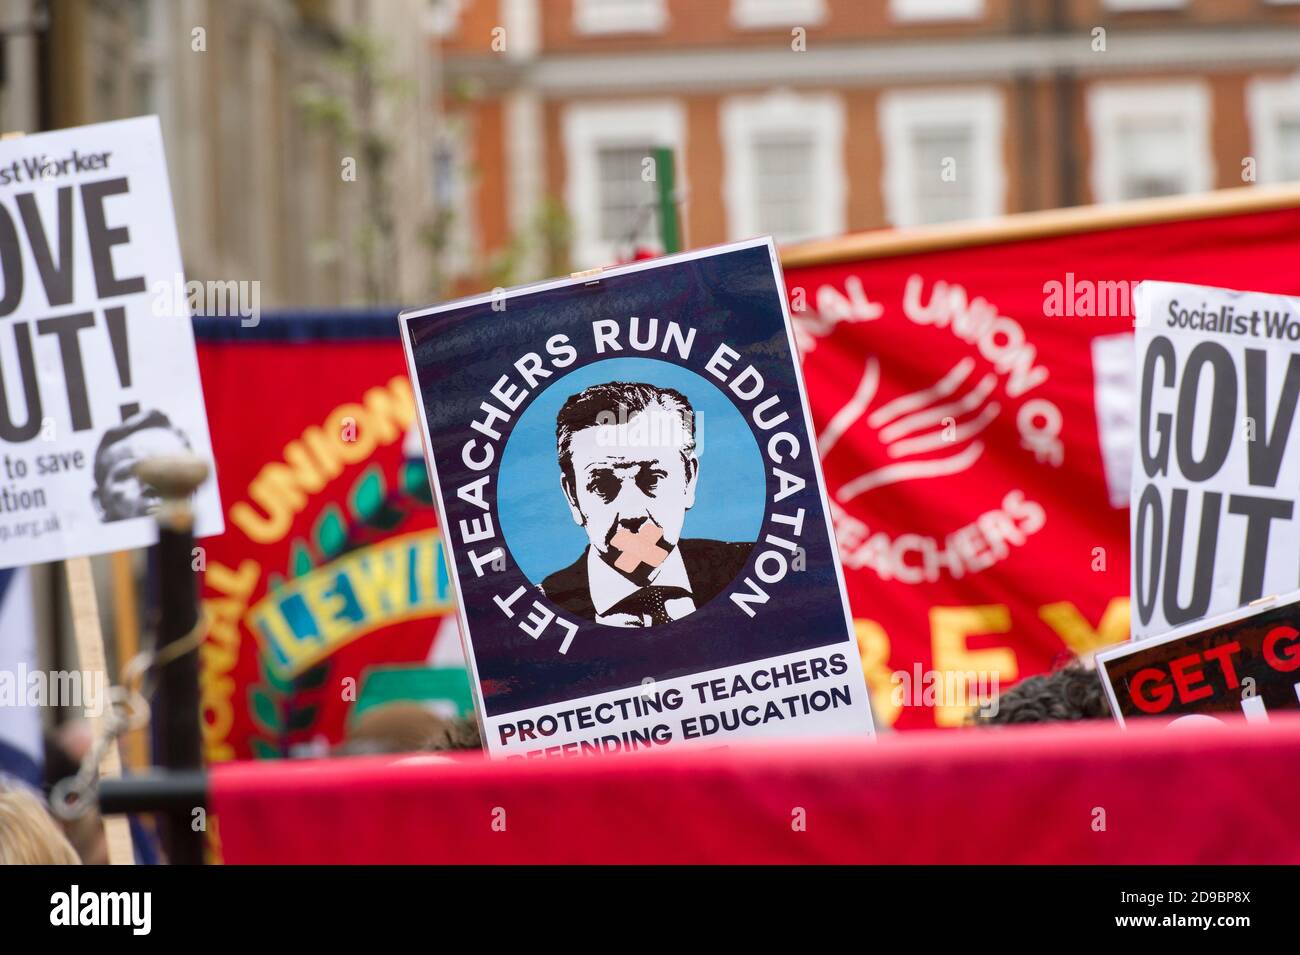 March in support of the national 24 hour teachers strike in England and Wales called by NUT (National Union of Teachers). The strike is to protest against government education reforms brought under Michael Gove the Conservative Secretary of State for Education, include changes to pay and conditions of teachers. The march started from Portland Place and finished at Parliament Square. Portland Place, London, UK.  26 Mar 2014 Stock Photo